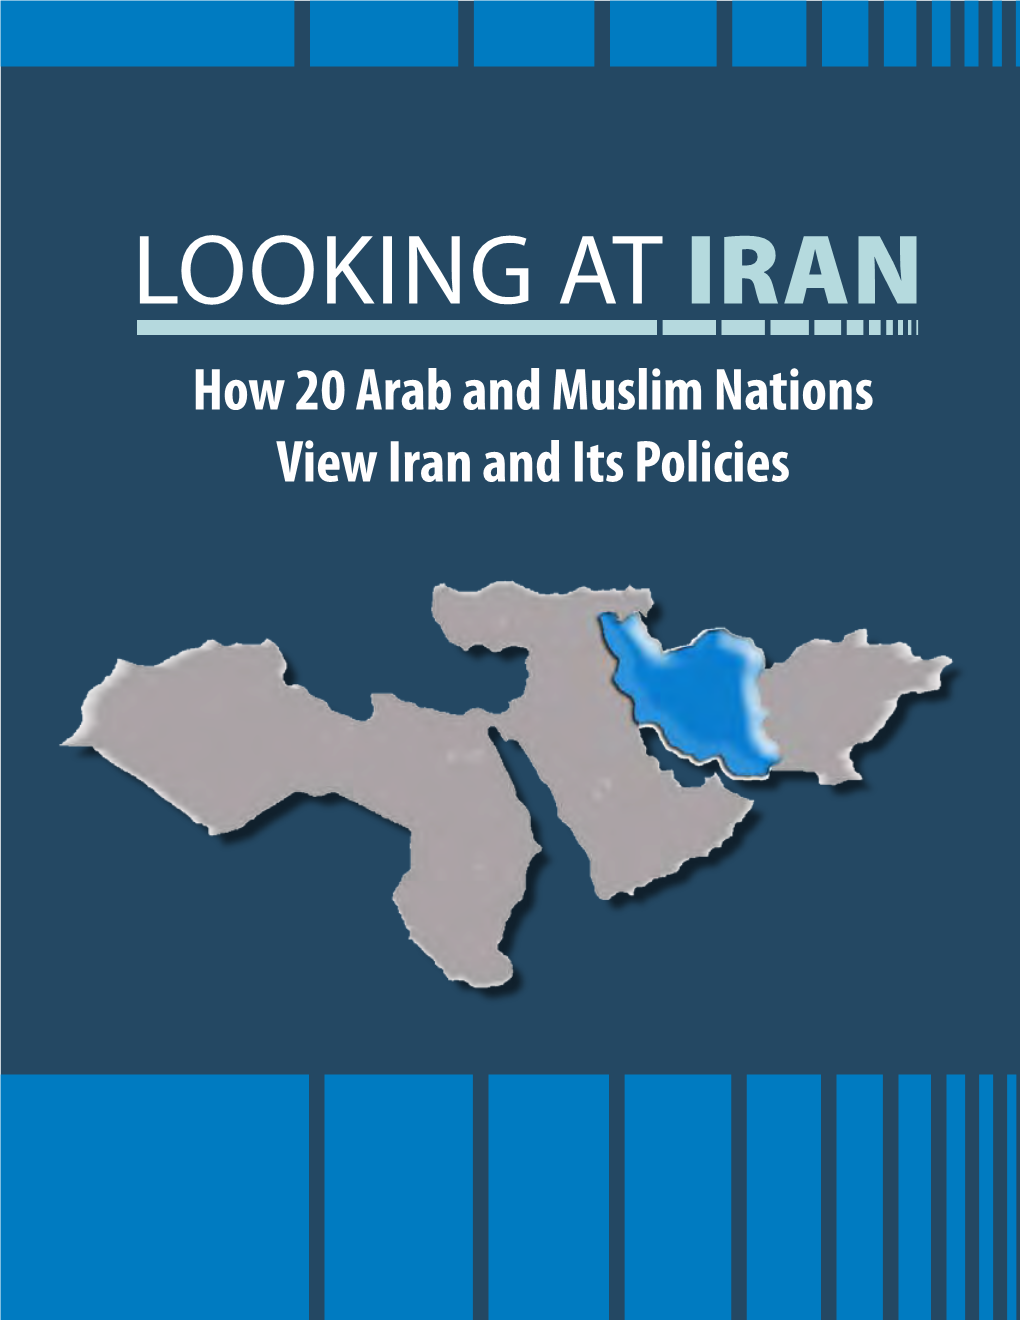 Looking at Iran How 20 Arab and Muslim Nations View Iran and Its Policies © 2012 Zogby Research Services, LLC JZ Analytics, LLC Dr